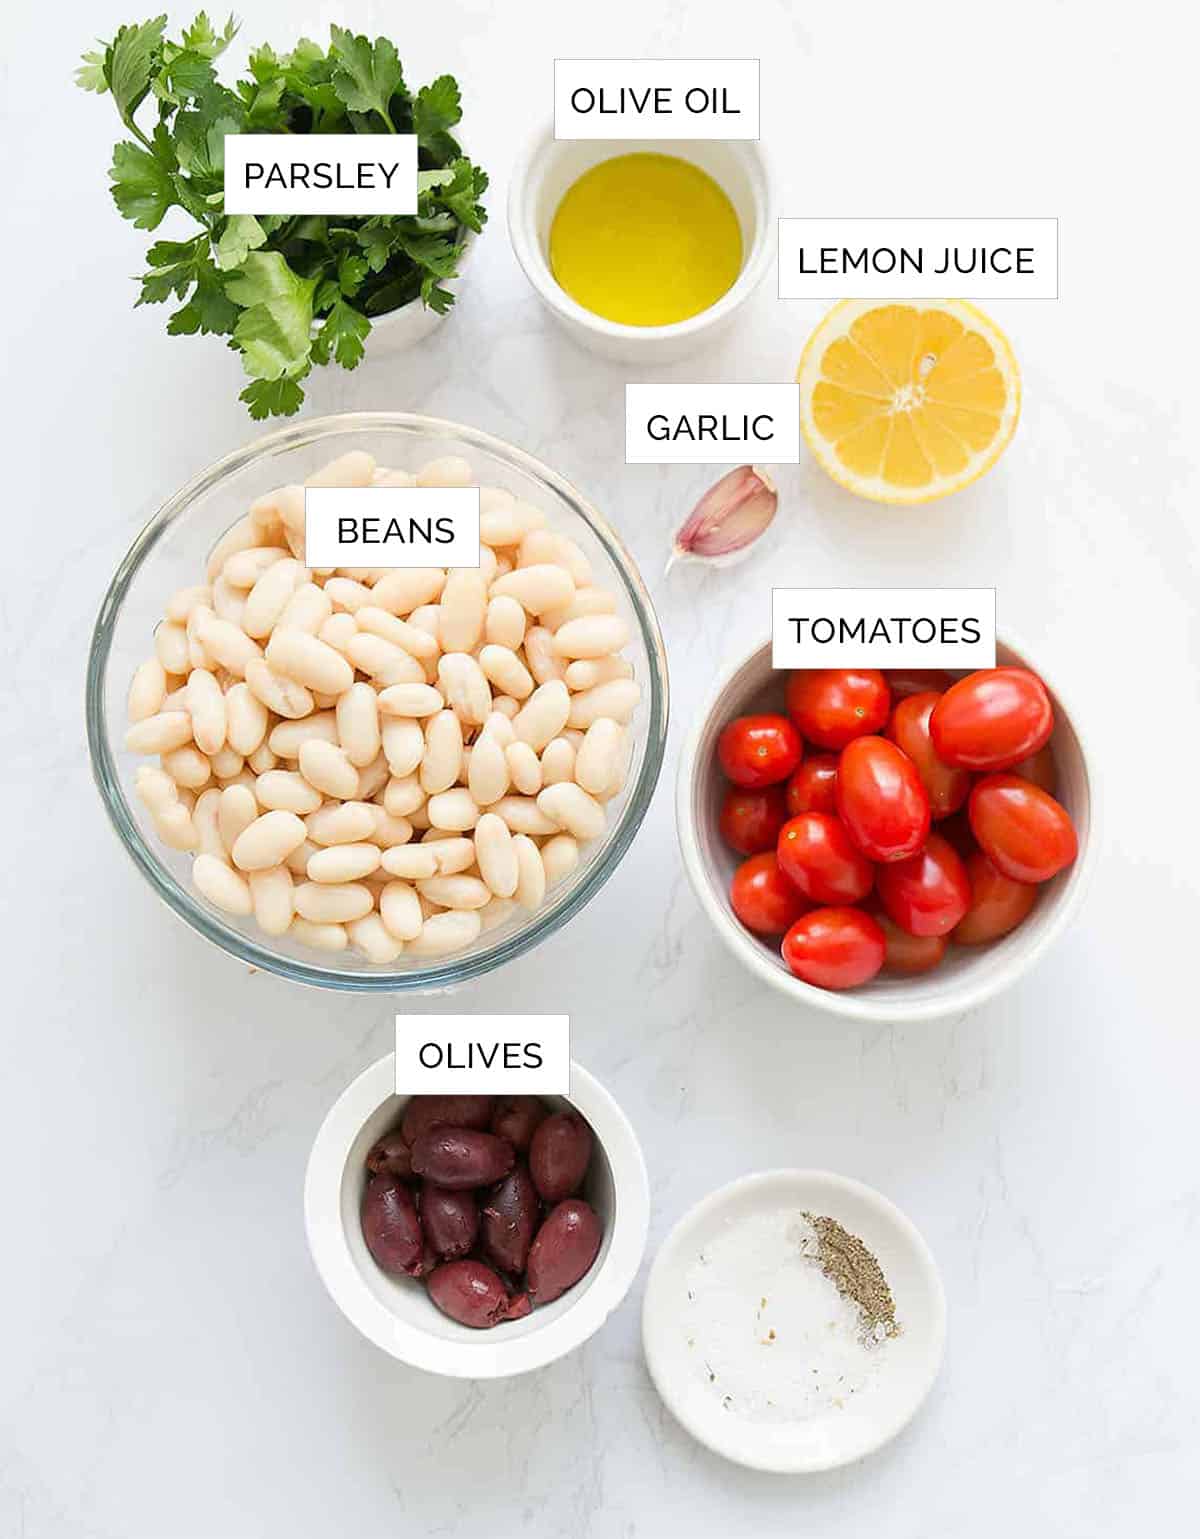 The cannellini bean salad ingredients are arranged over a white background.